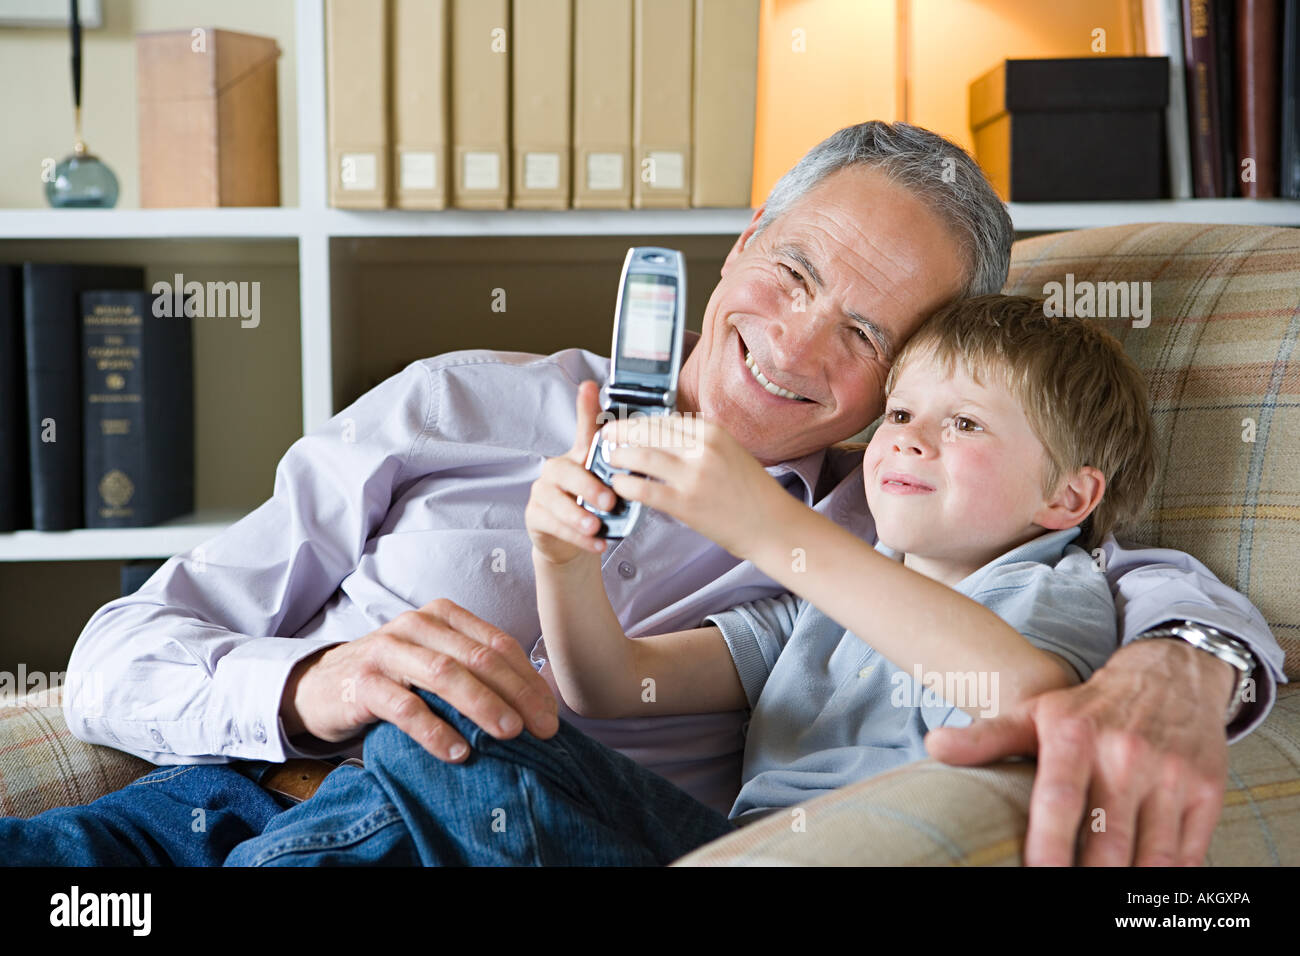 Boy and grandfather with camera phone Stock Photo